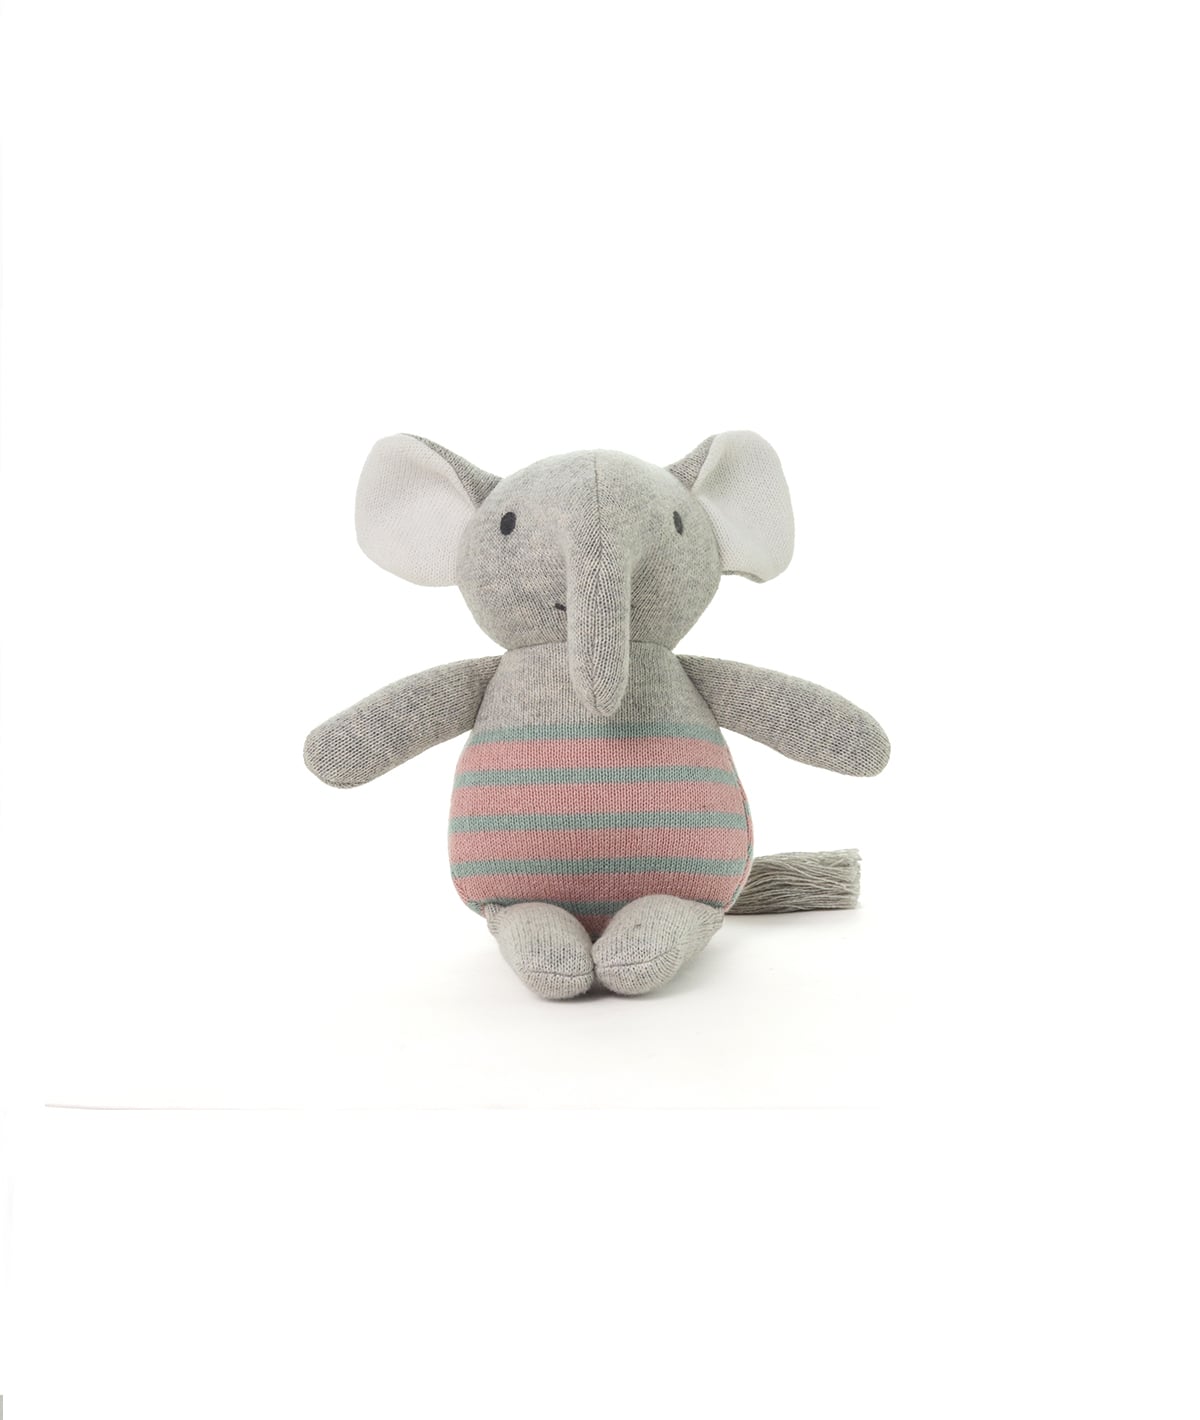 Cute as a Button Gift Bundle- (Set of 2 - Blanket & Elephant Rattle) in Ivory Color